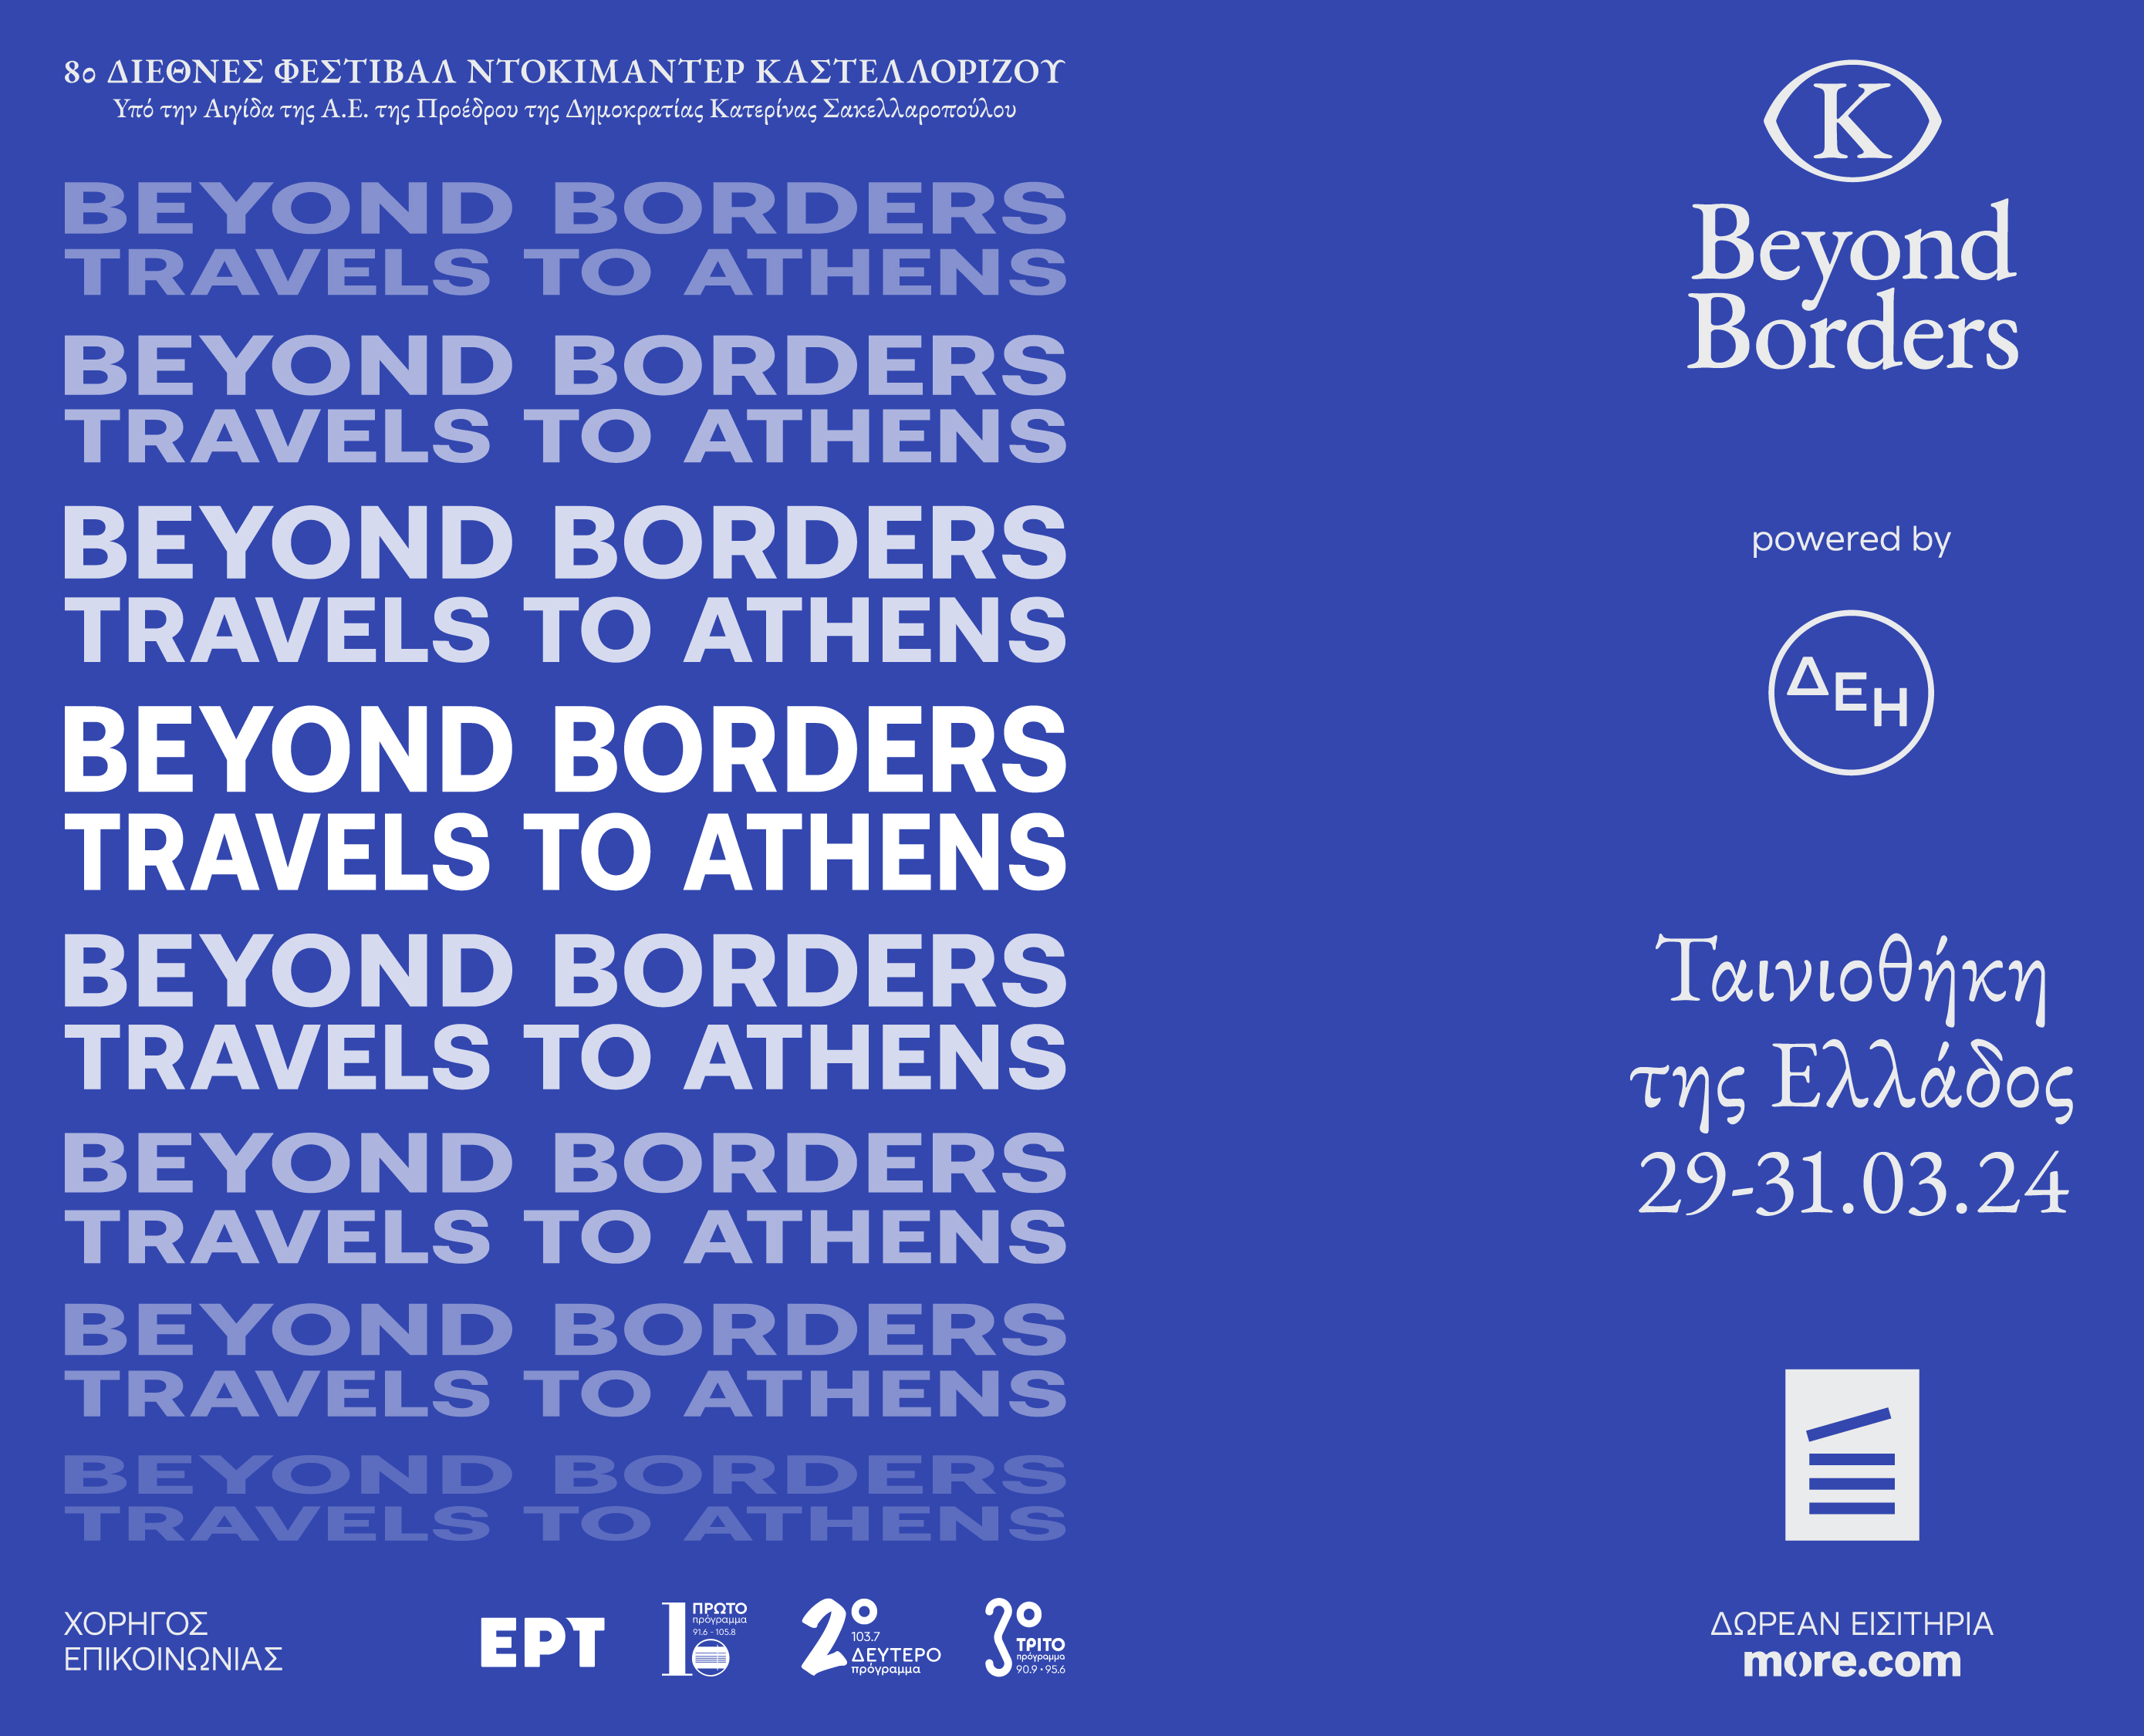 Beyond Borders travels to Athens